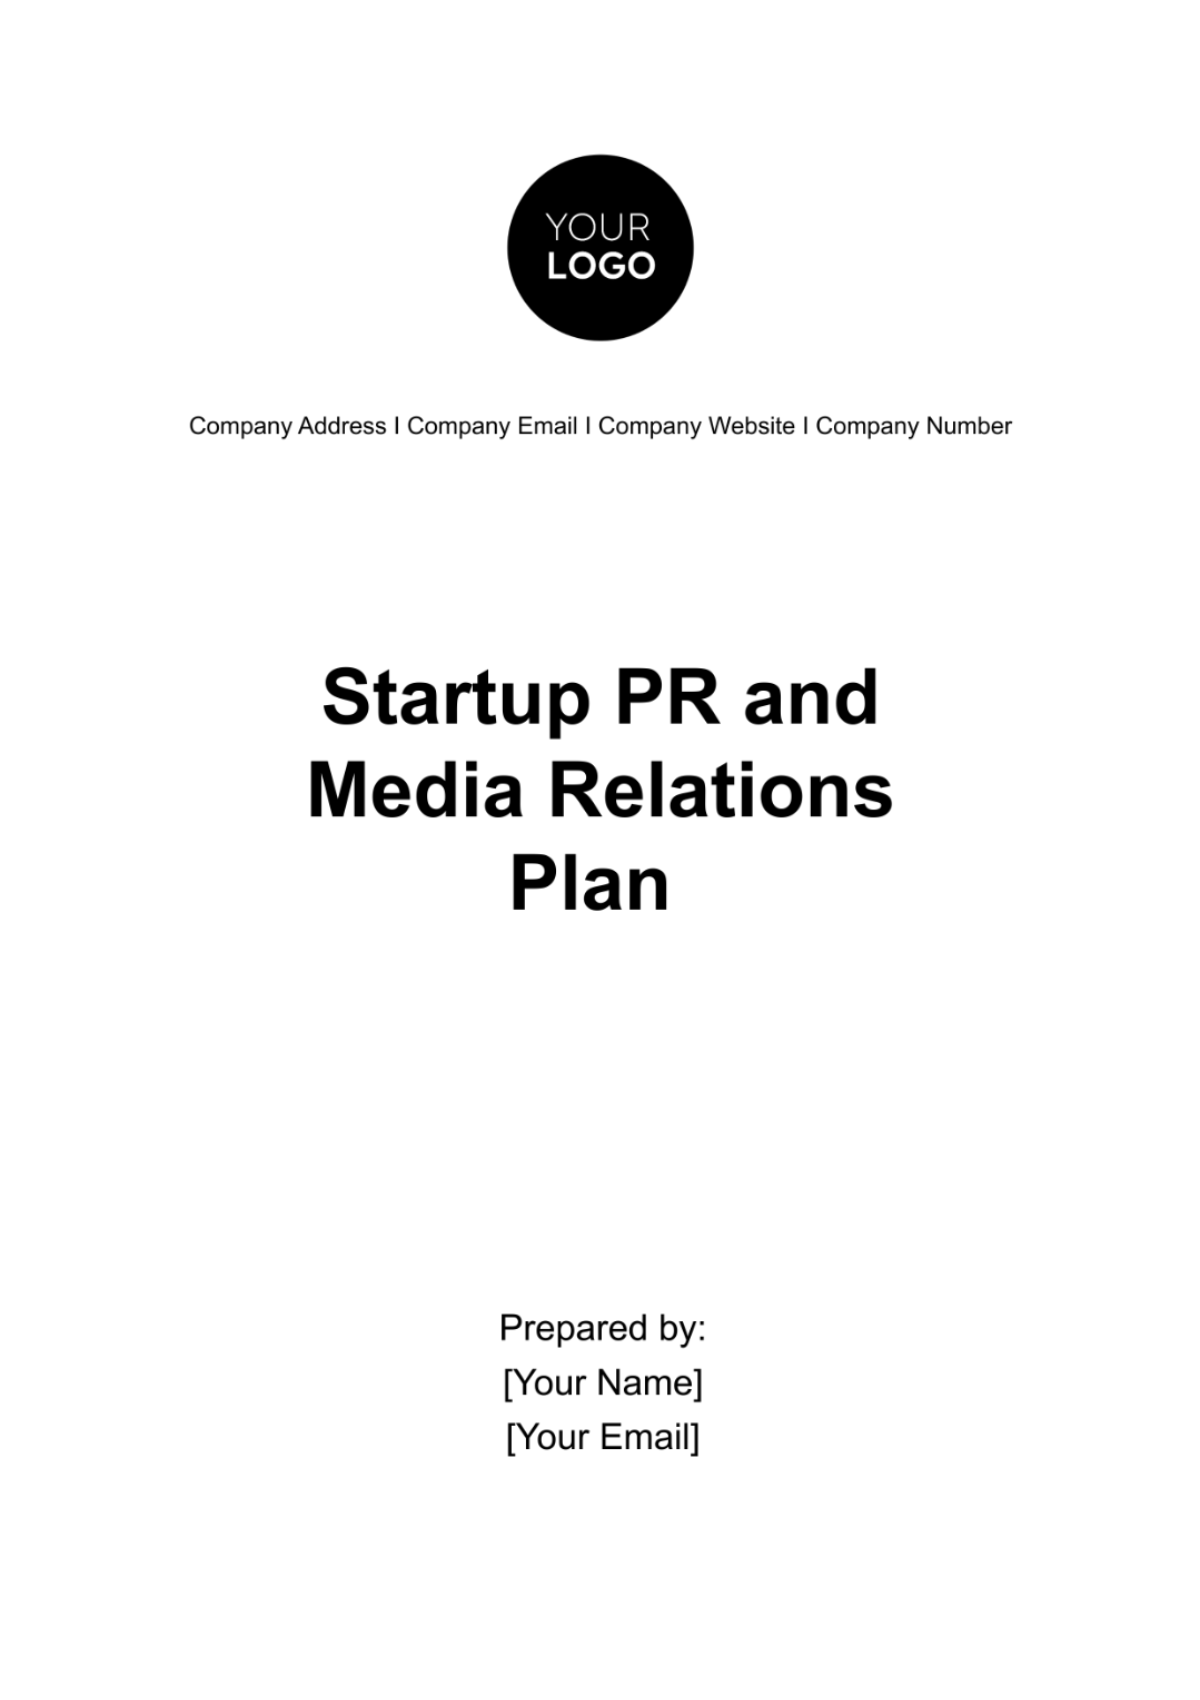 Startup PR and Media Relations Plan Template